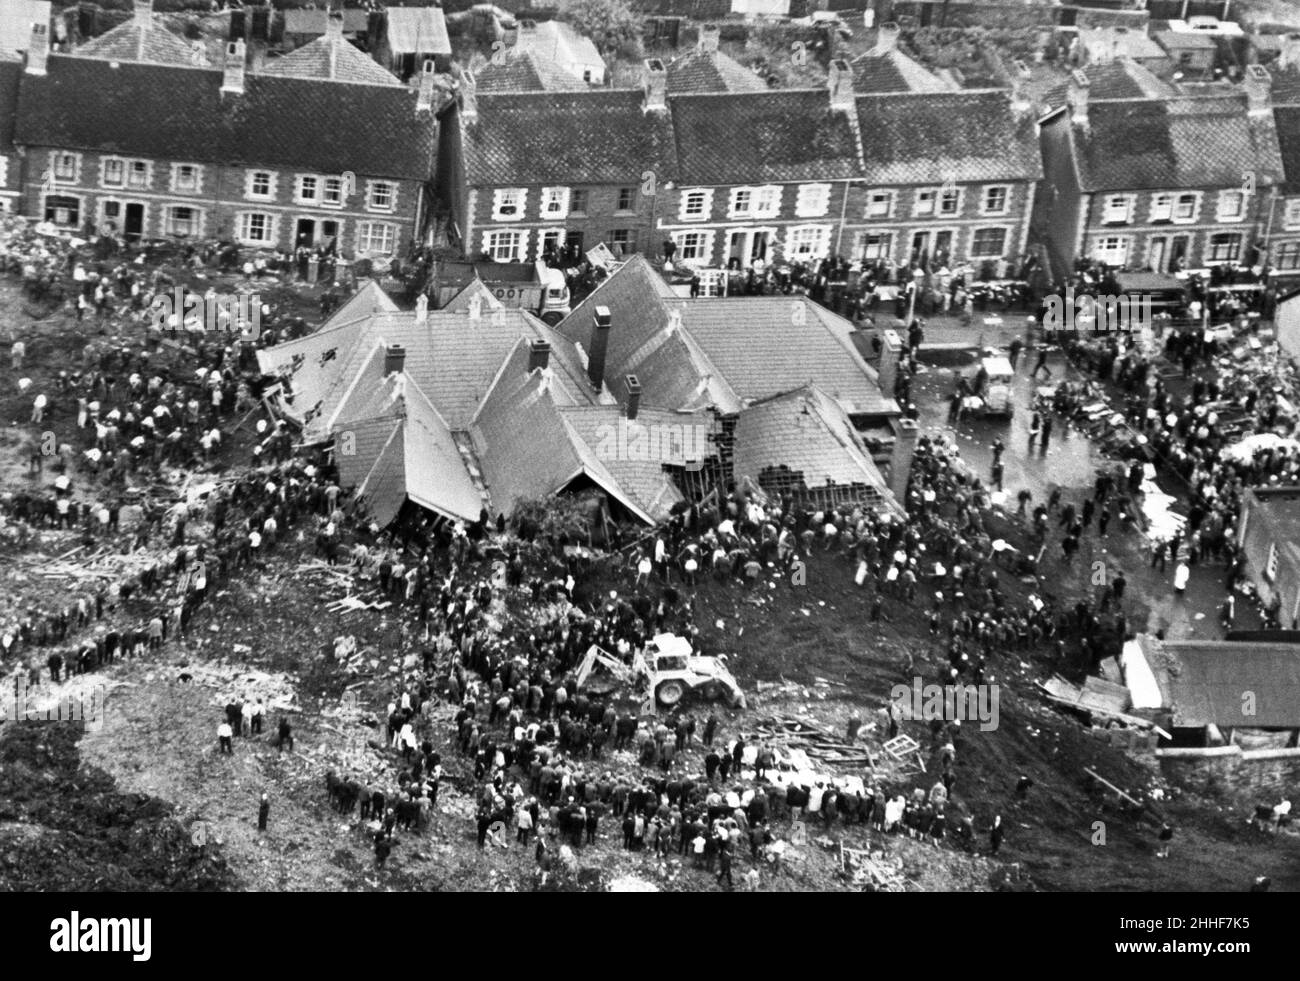 File photo dated 21/10/66 of the scene at Aberfan, Glamorgan, after a man-made mountain of pit waste slid down onto Pantglas School and a row of housing killing 116 children and 28 adults. The Aberfan clock, which stopped at 9.13am, the moment the Aberfan disaster struck on October 21 1966., has been donated to the Amgueddfa Cymru, the National Museum Wales' permanent collection, and will form part of the collections at St Fagans National Museum of History. Issue date: Monday January 24, 2022. Stock Photo